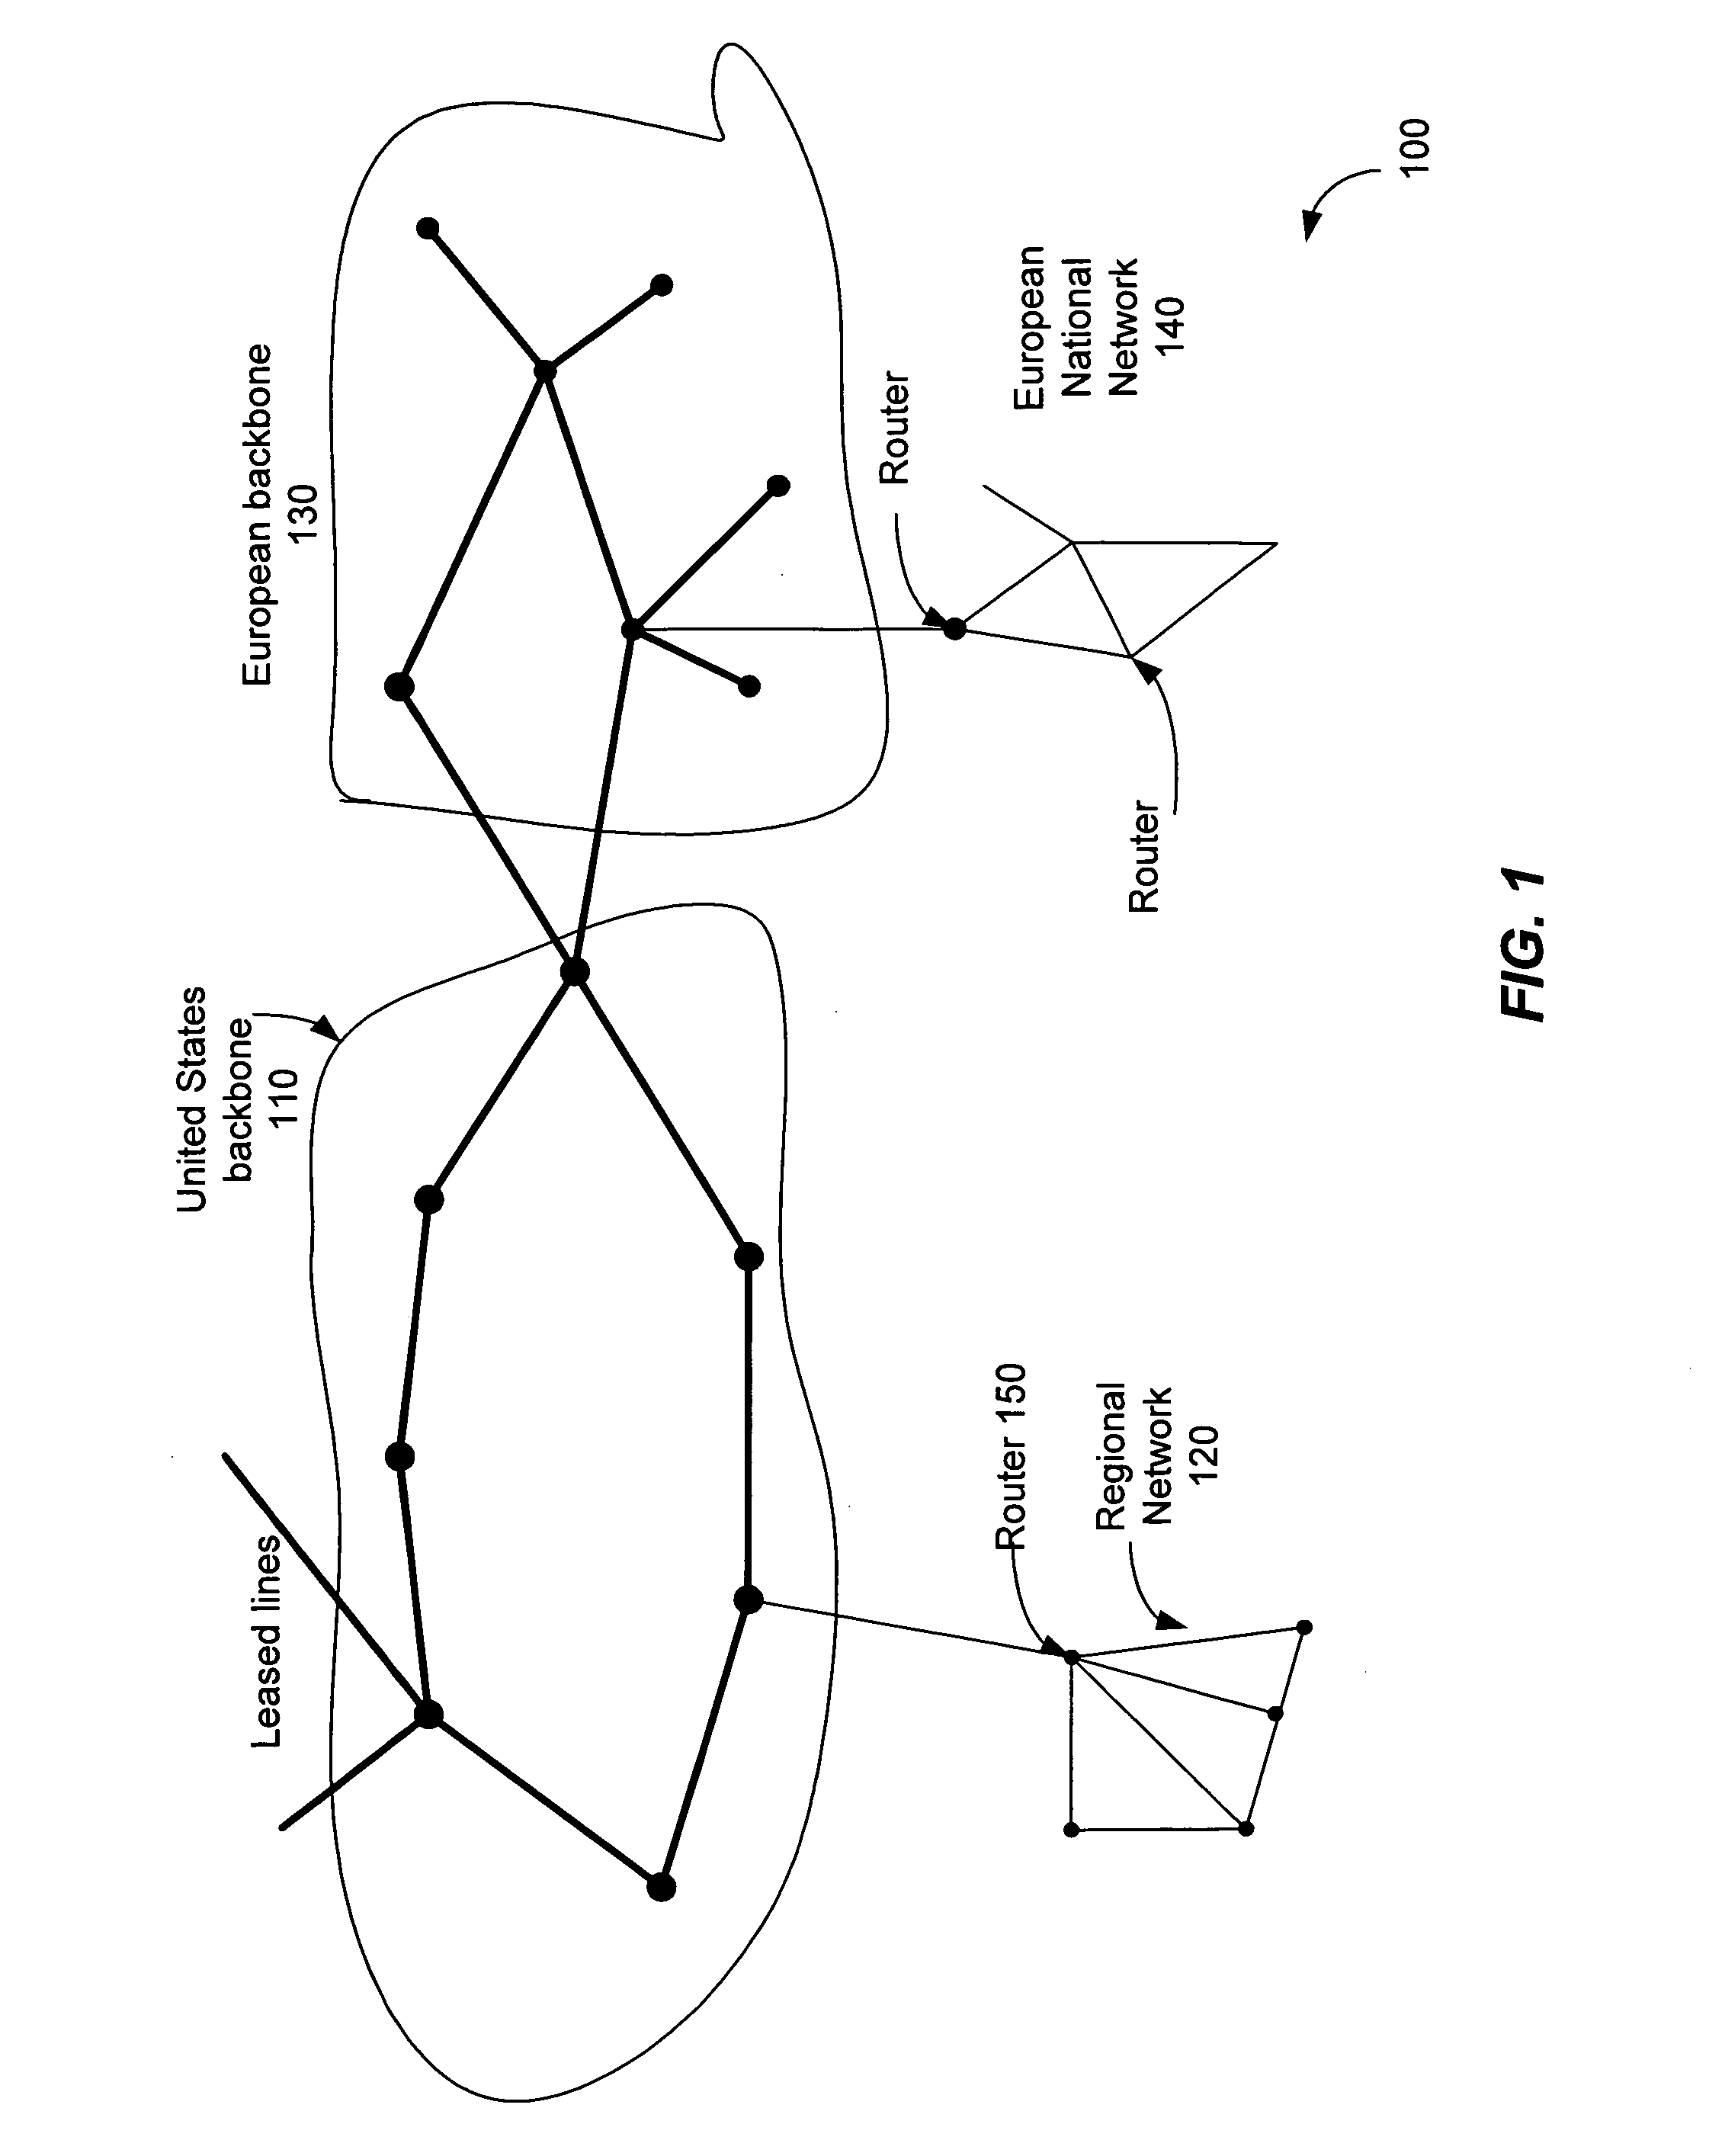 Mesh with projection channel access (MPCA)